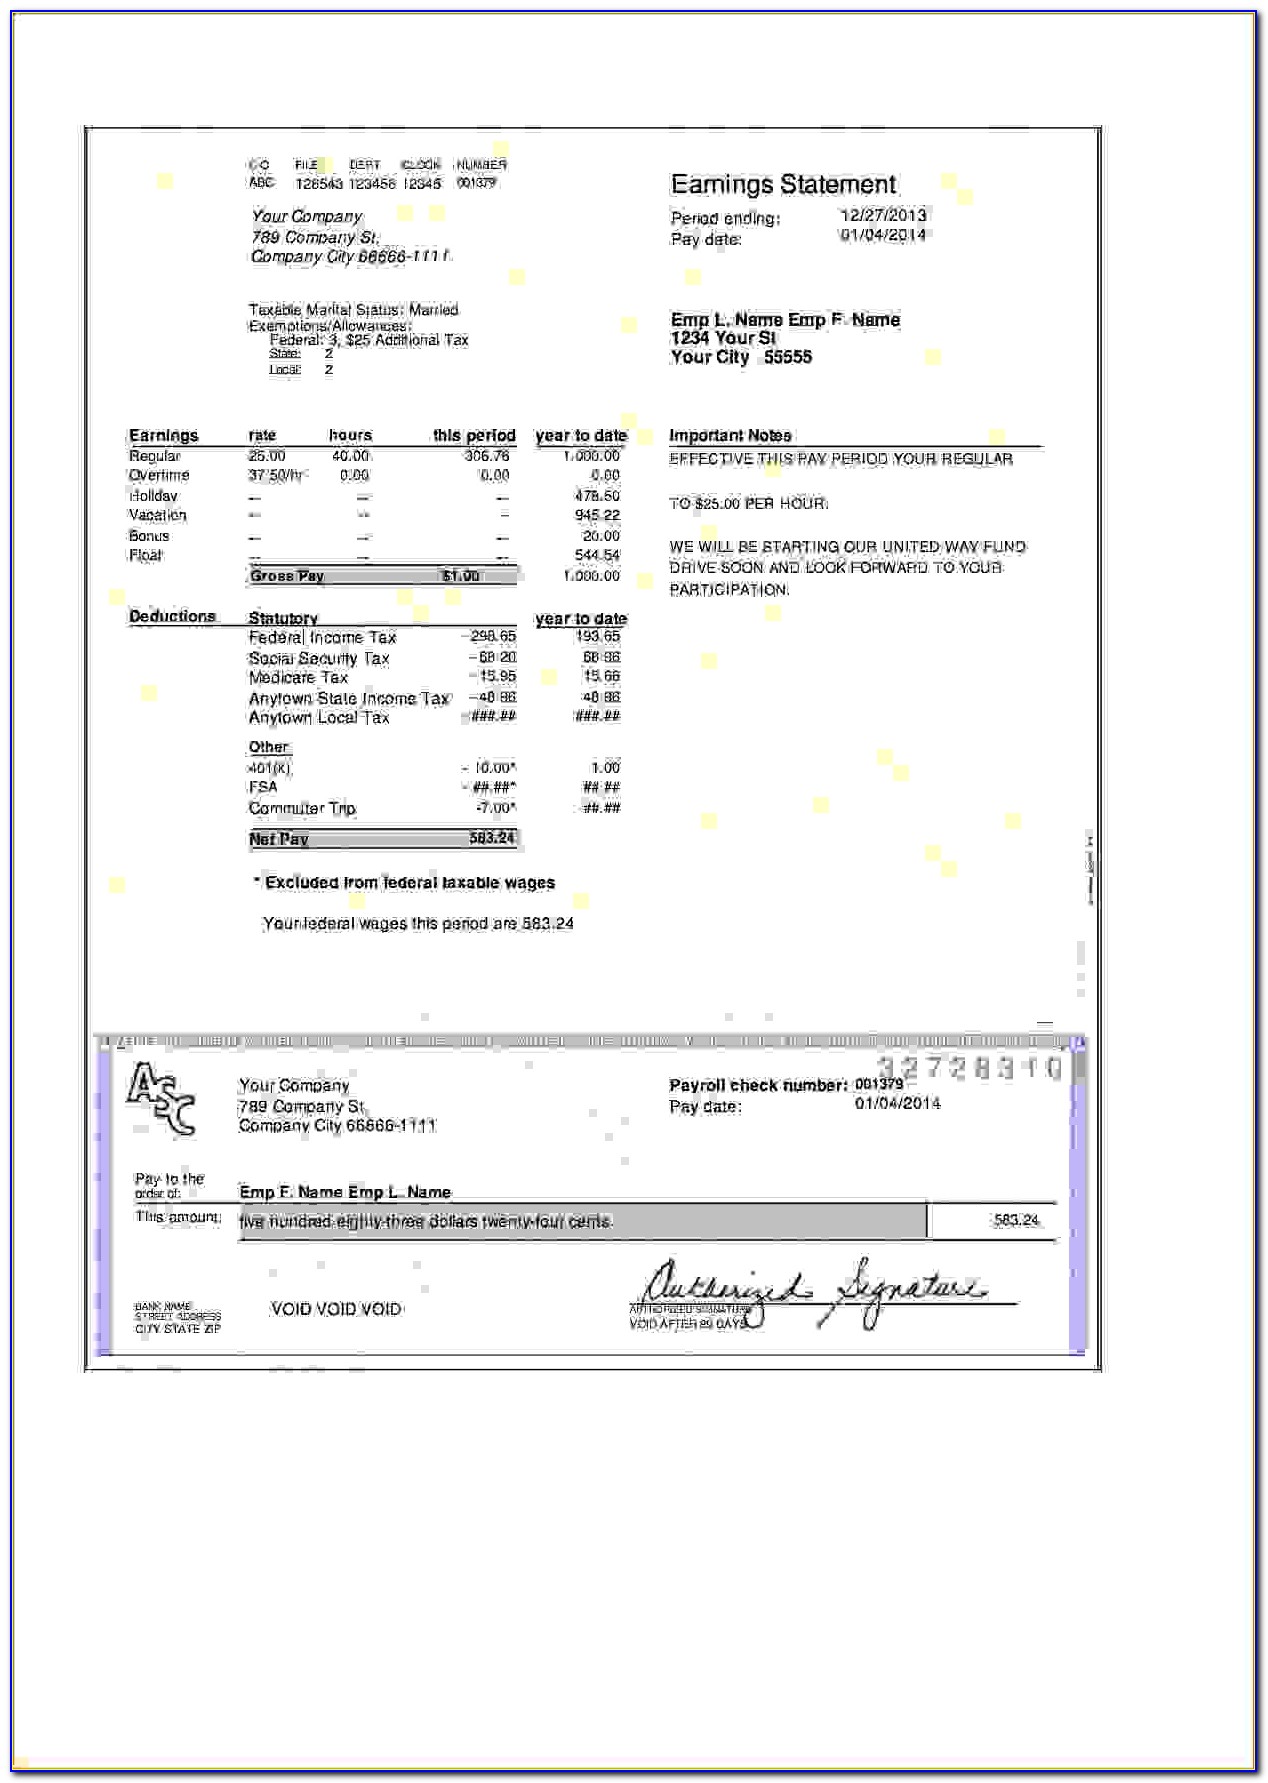 Pay Statement Template Free